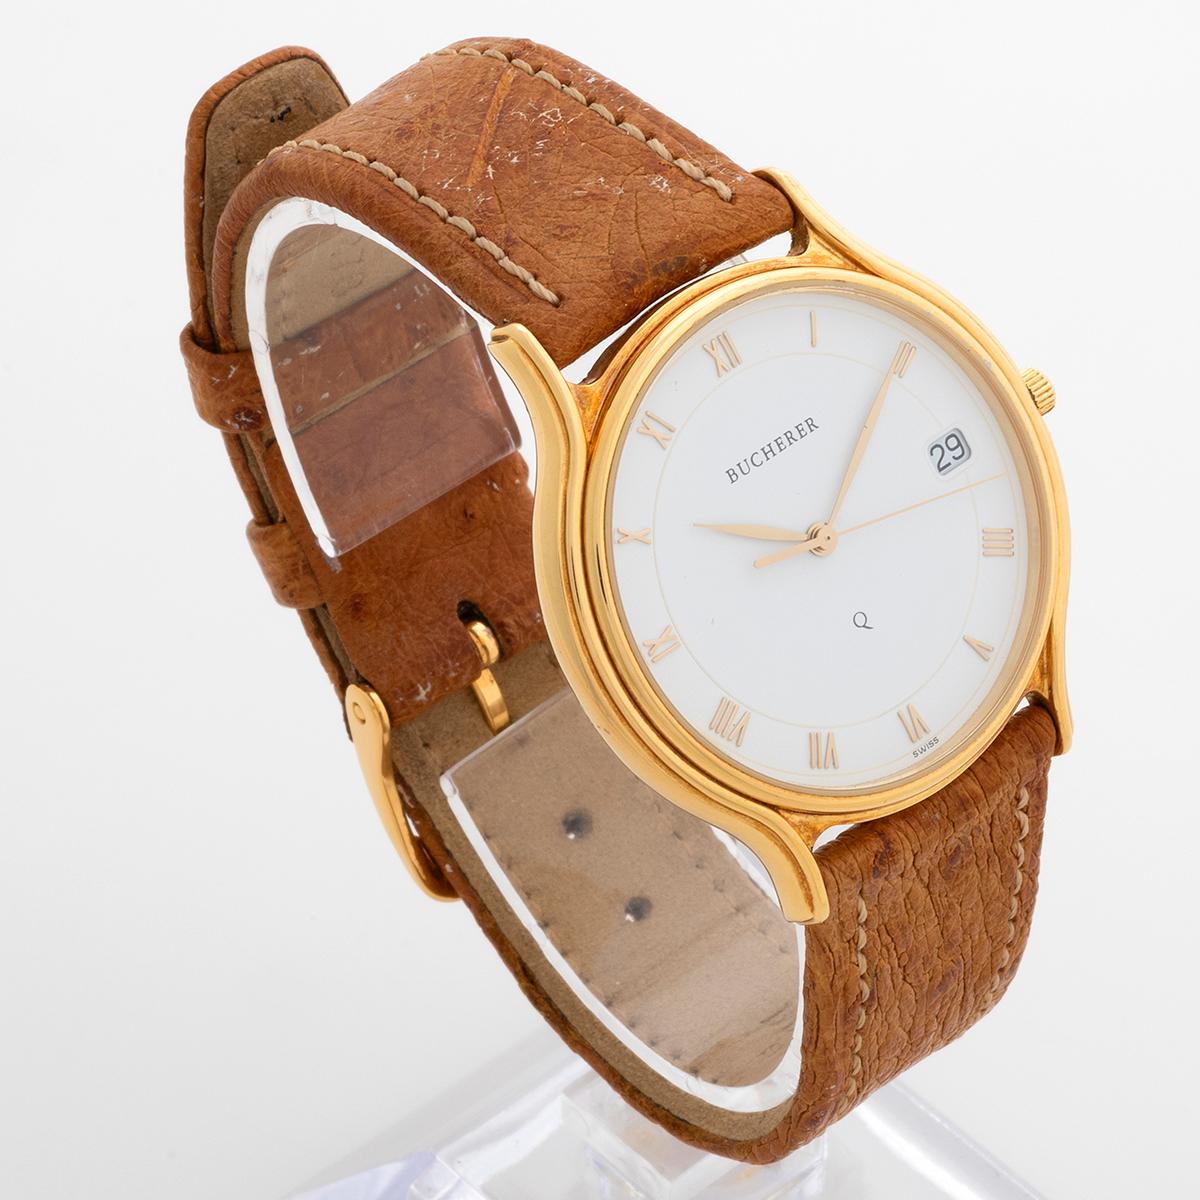 A beautiful neo-vintage dress watch, our Bucherer 255.107 features a 18k yellow gold 35mm case, with white dial with Roman numerals, quartz movement, tan leather strap and gold tone tang buckle. Presented in superb condition, almost new old stock ,